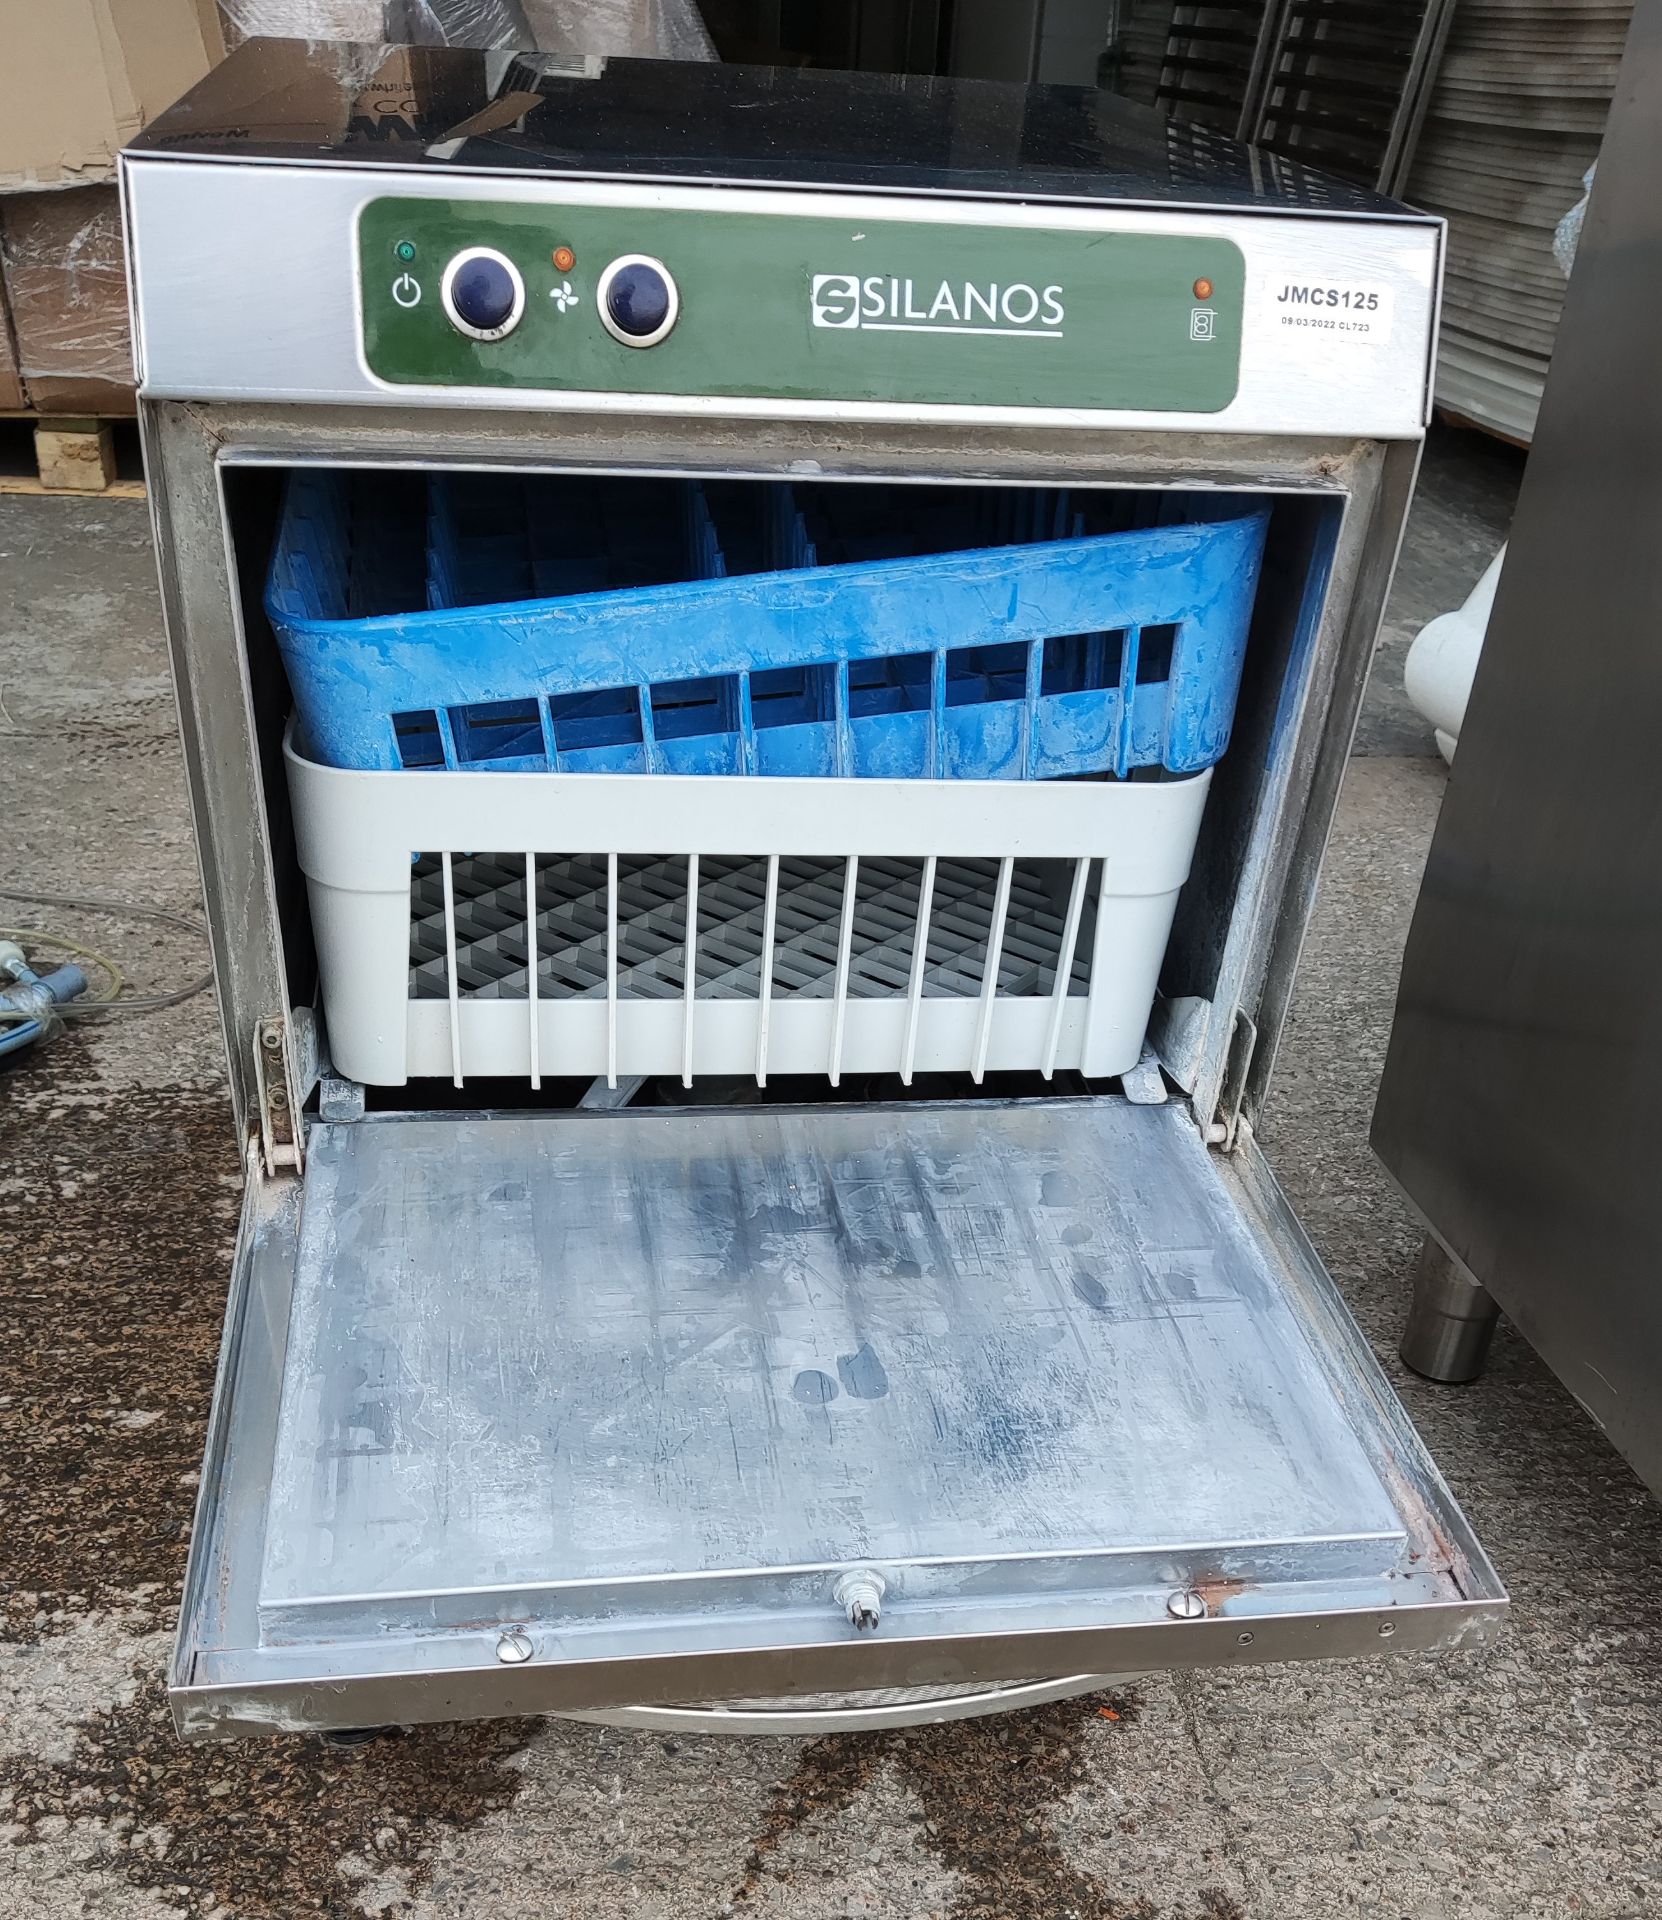 1 x Silanos E40 ECO Undercounter Glass Washer with Low Stand - JMCS125 - CL723 - Location: Altrincha - Image 5 of 12